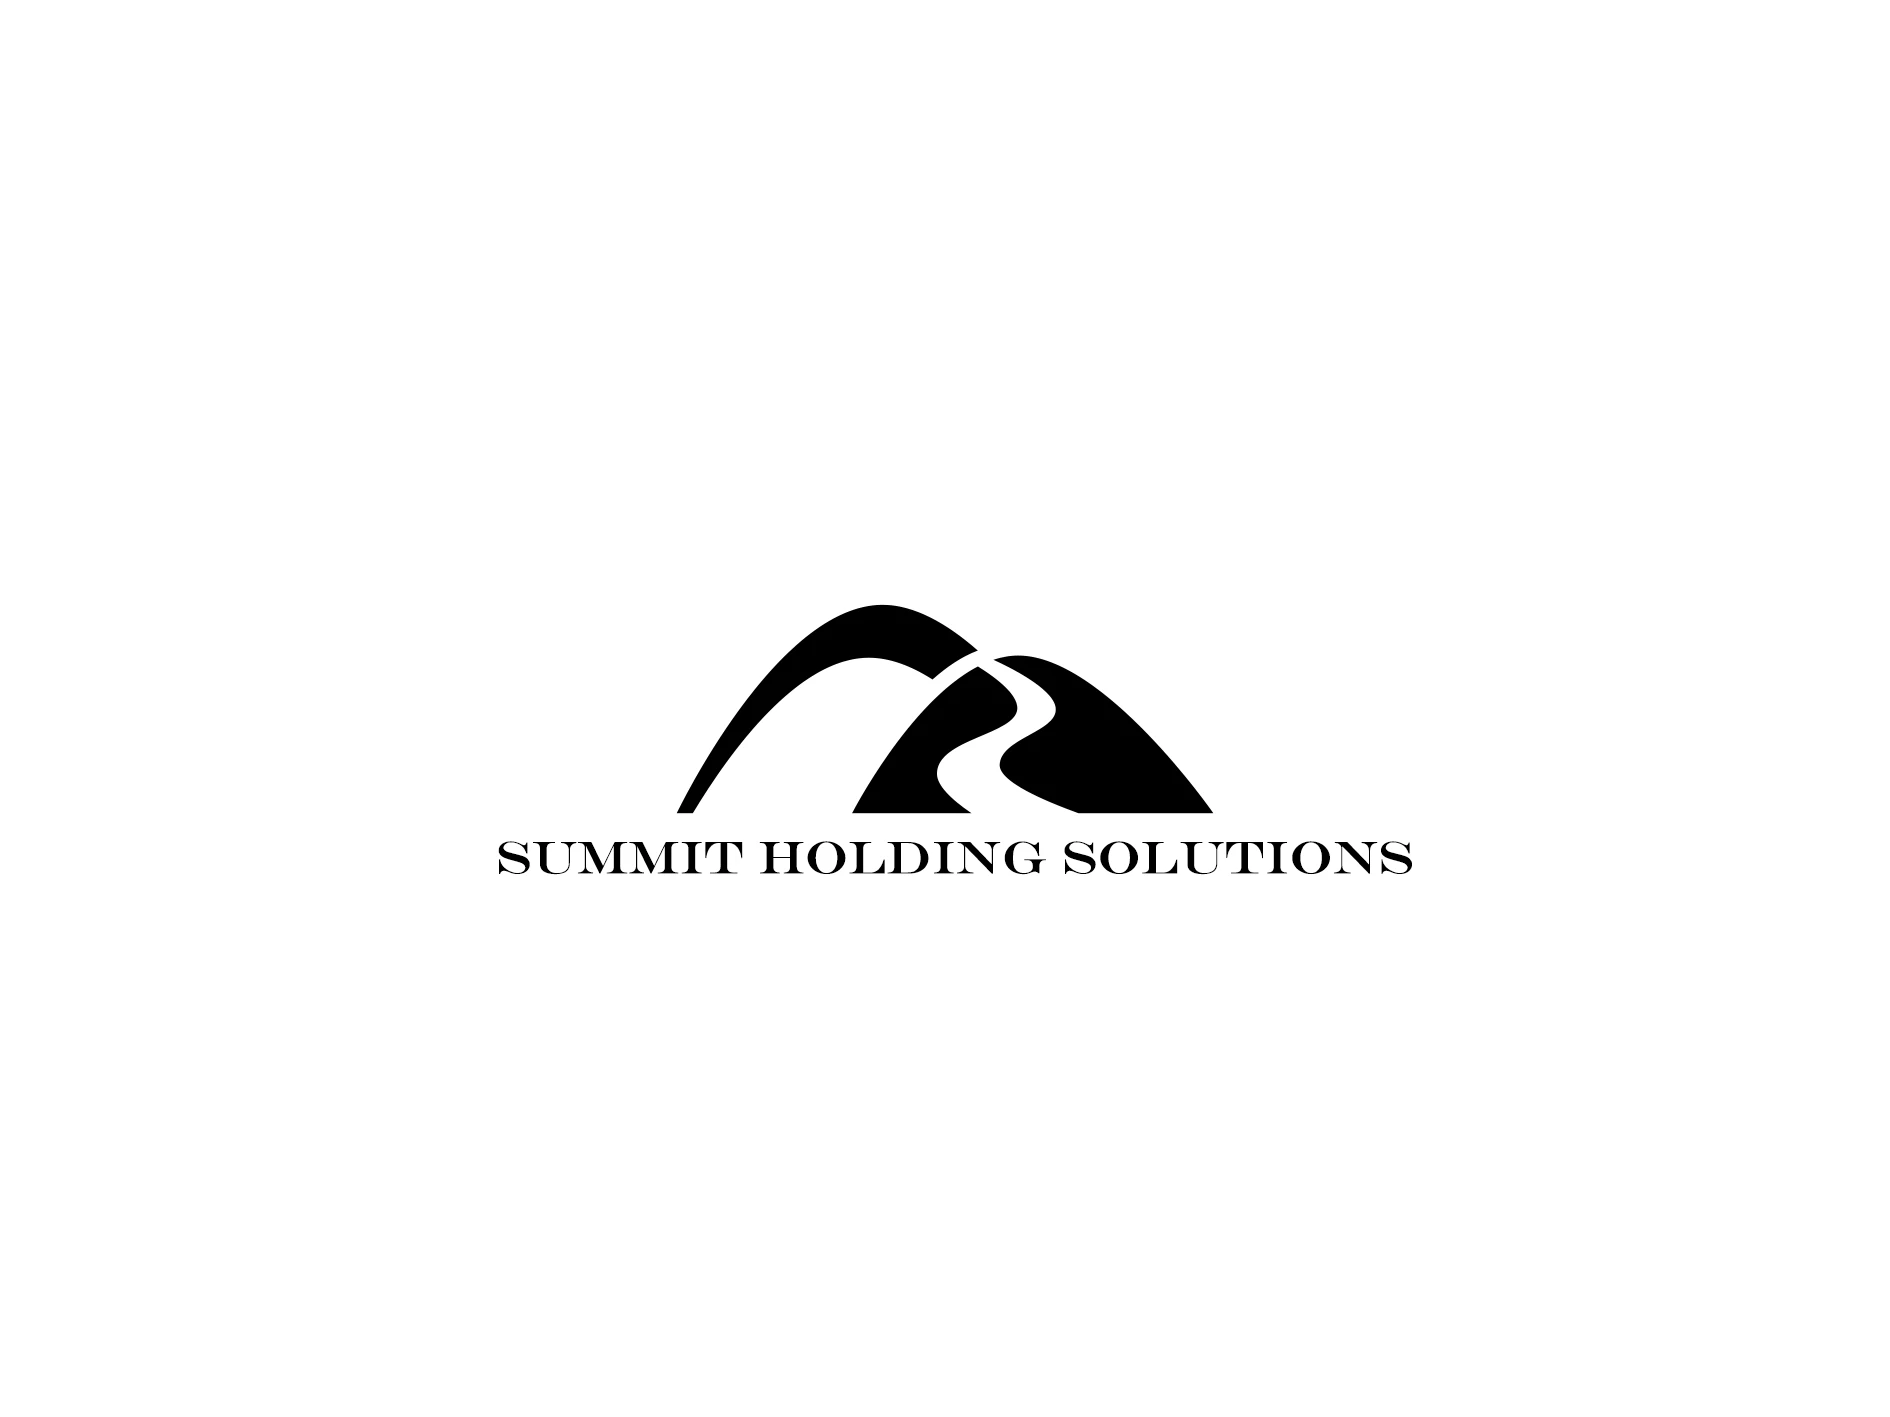 Summit Holding Solutions